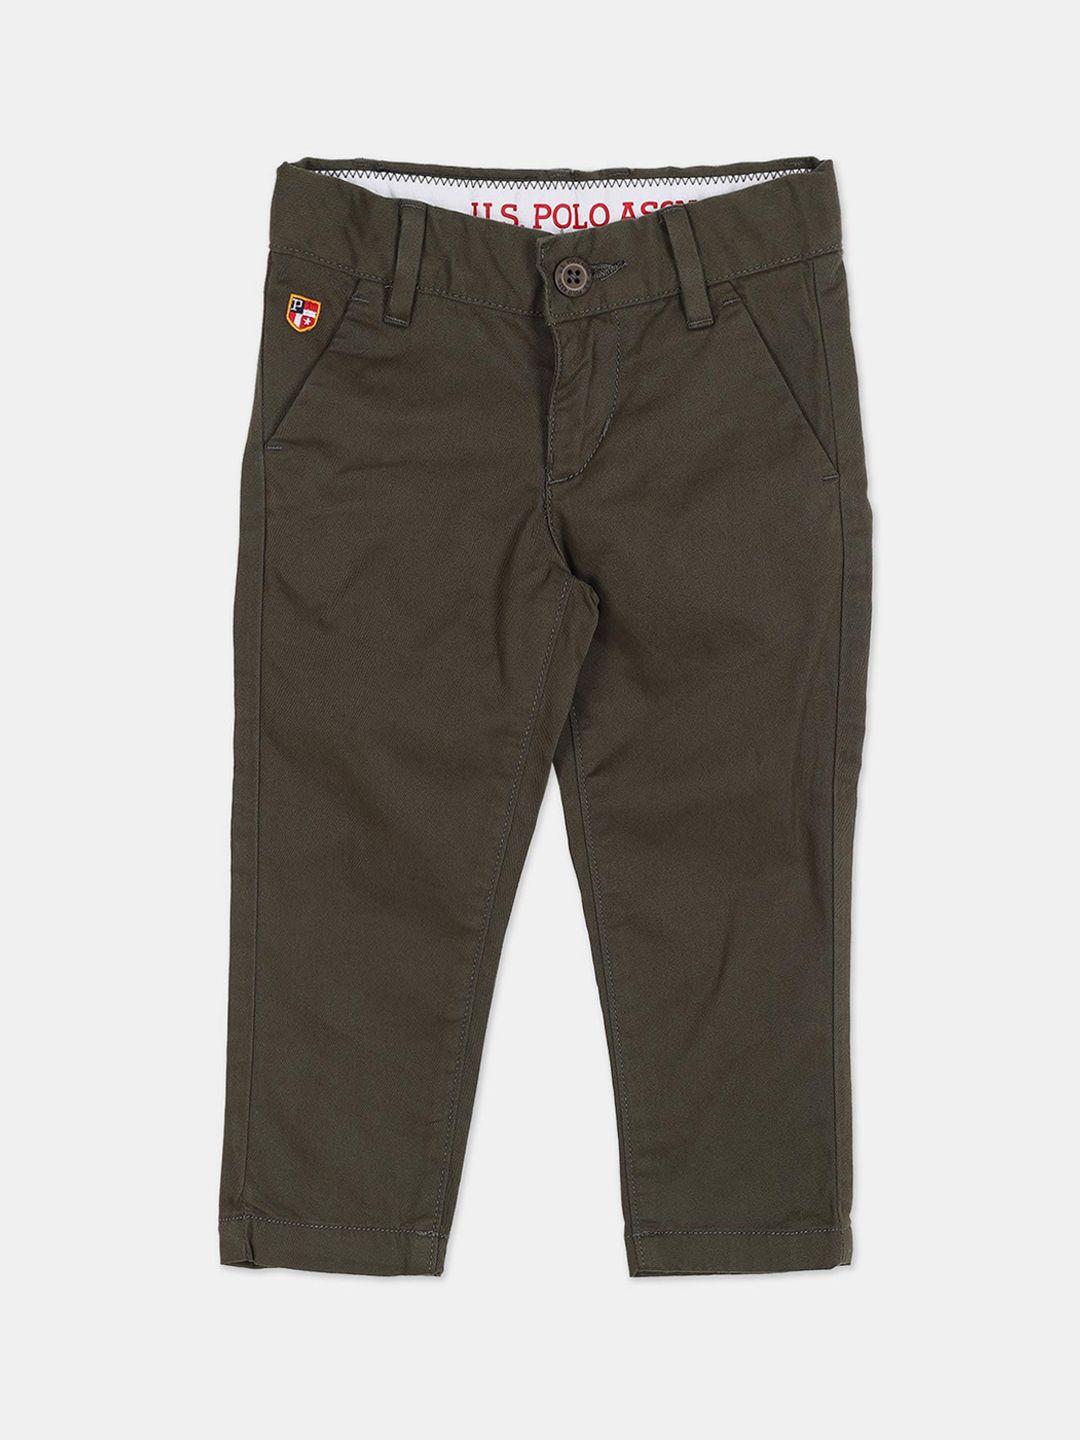 u s polo assn boys olive green trousers